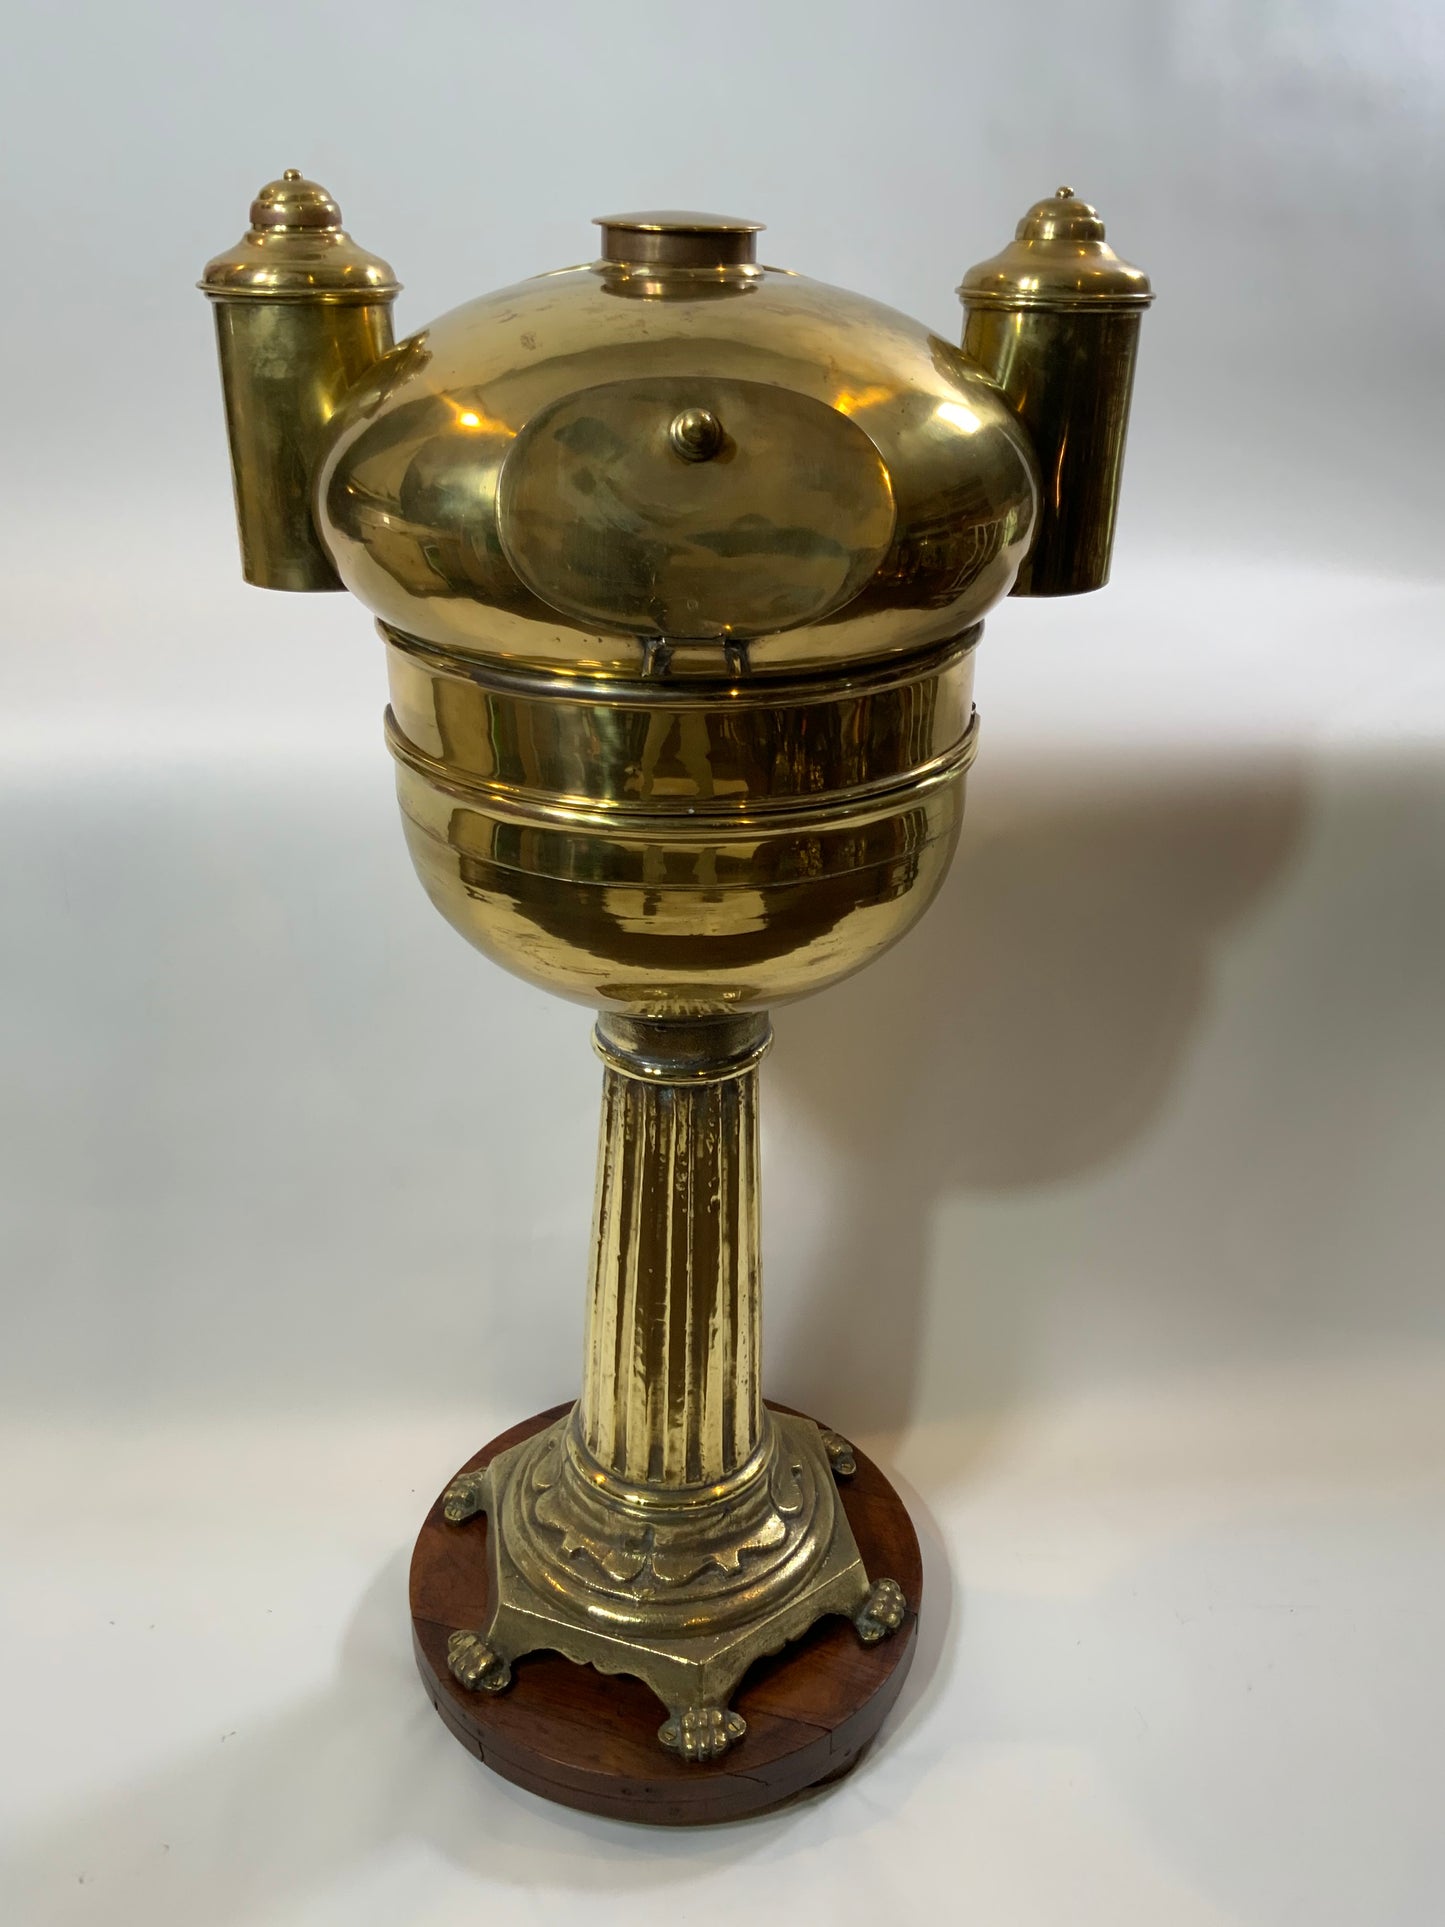 Yacht Binnacle from Italy Circa 1880 with Dry Card Compass - Lannan Gallery